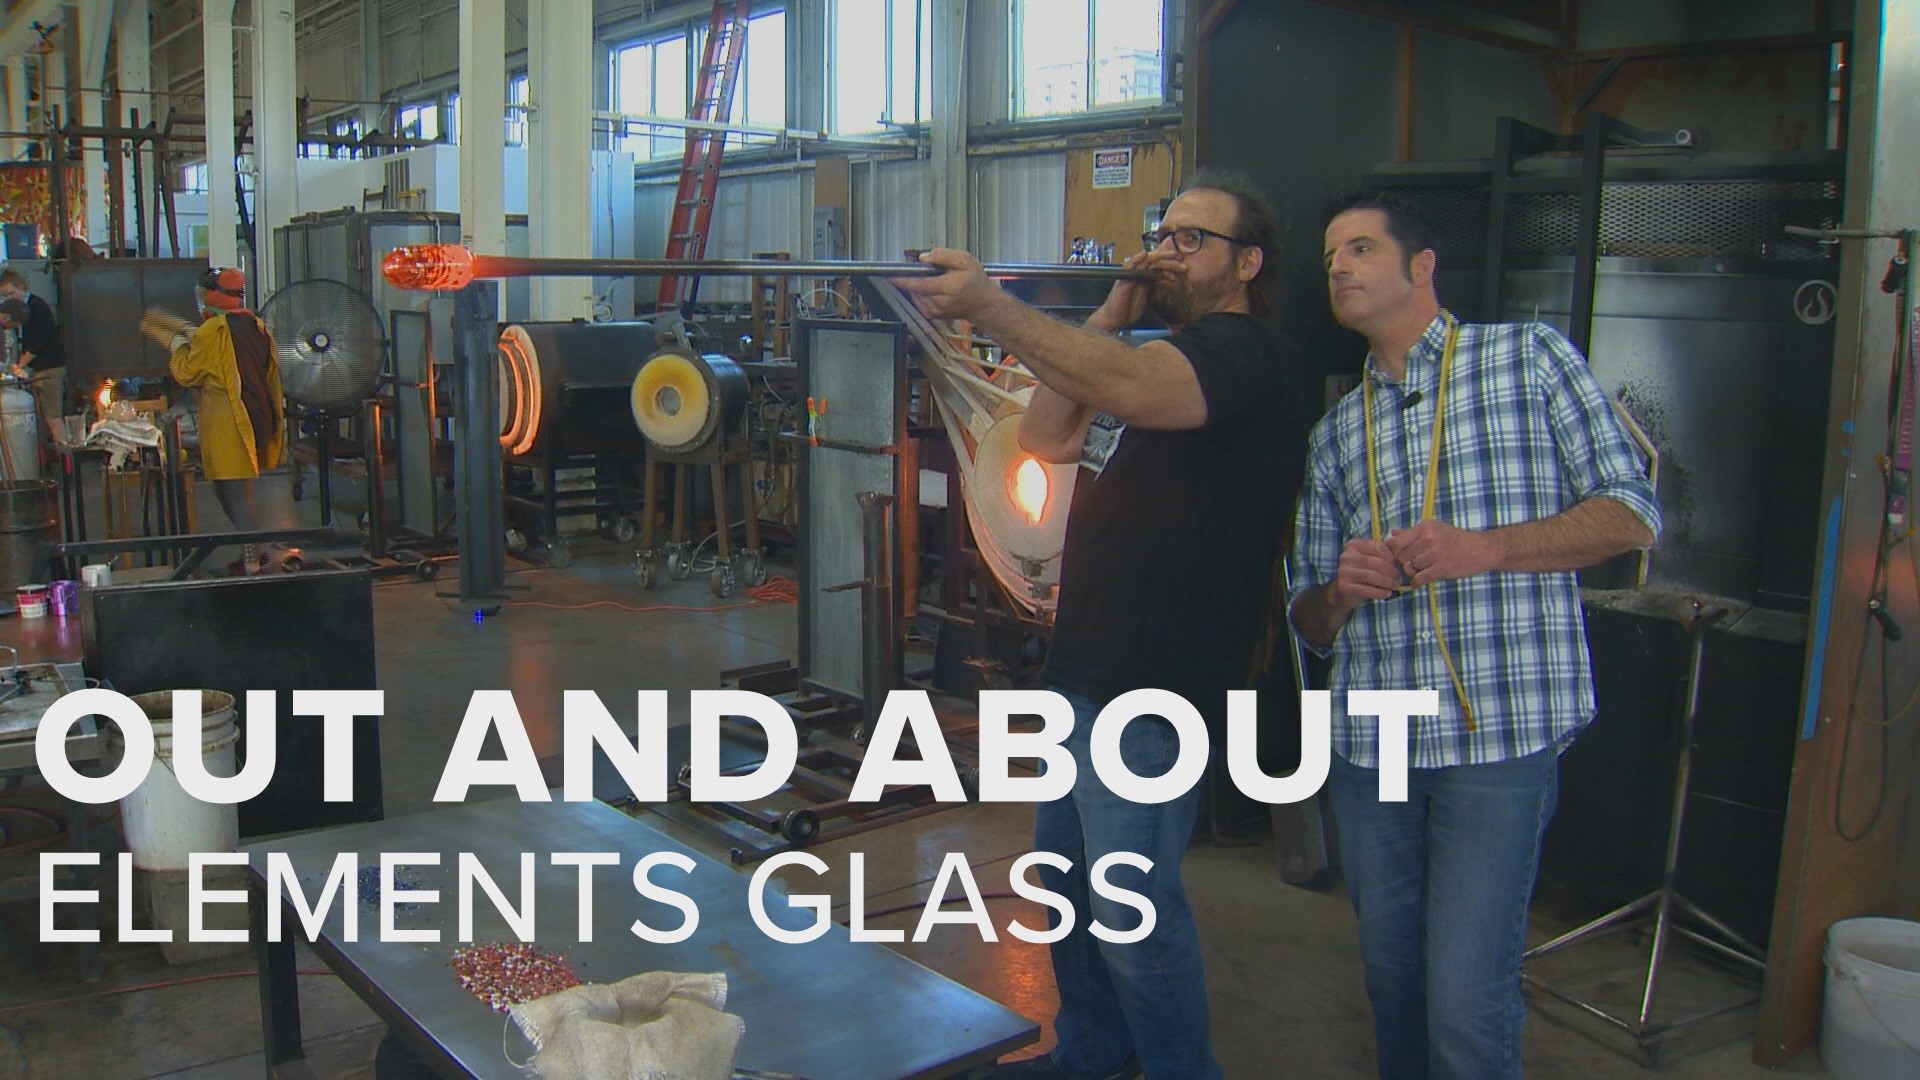 Drew Carney visits Elements Glass in Northwest Portland and learns how to make a Christmas ornament.